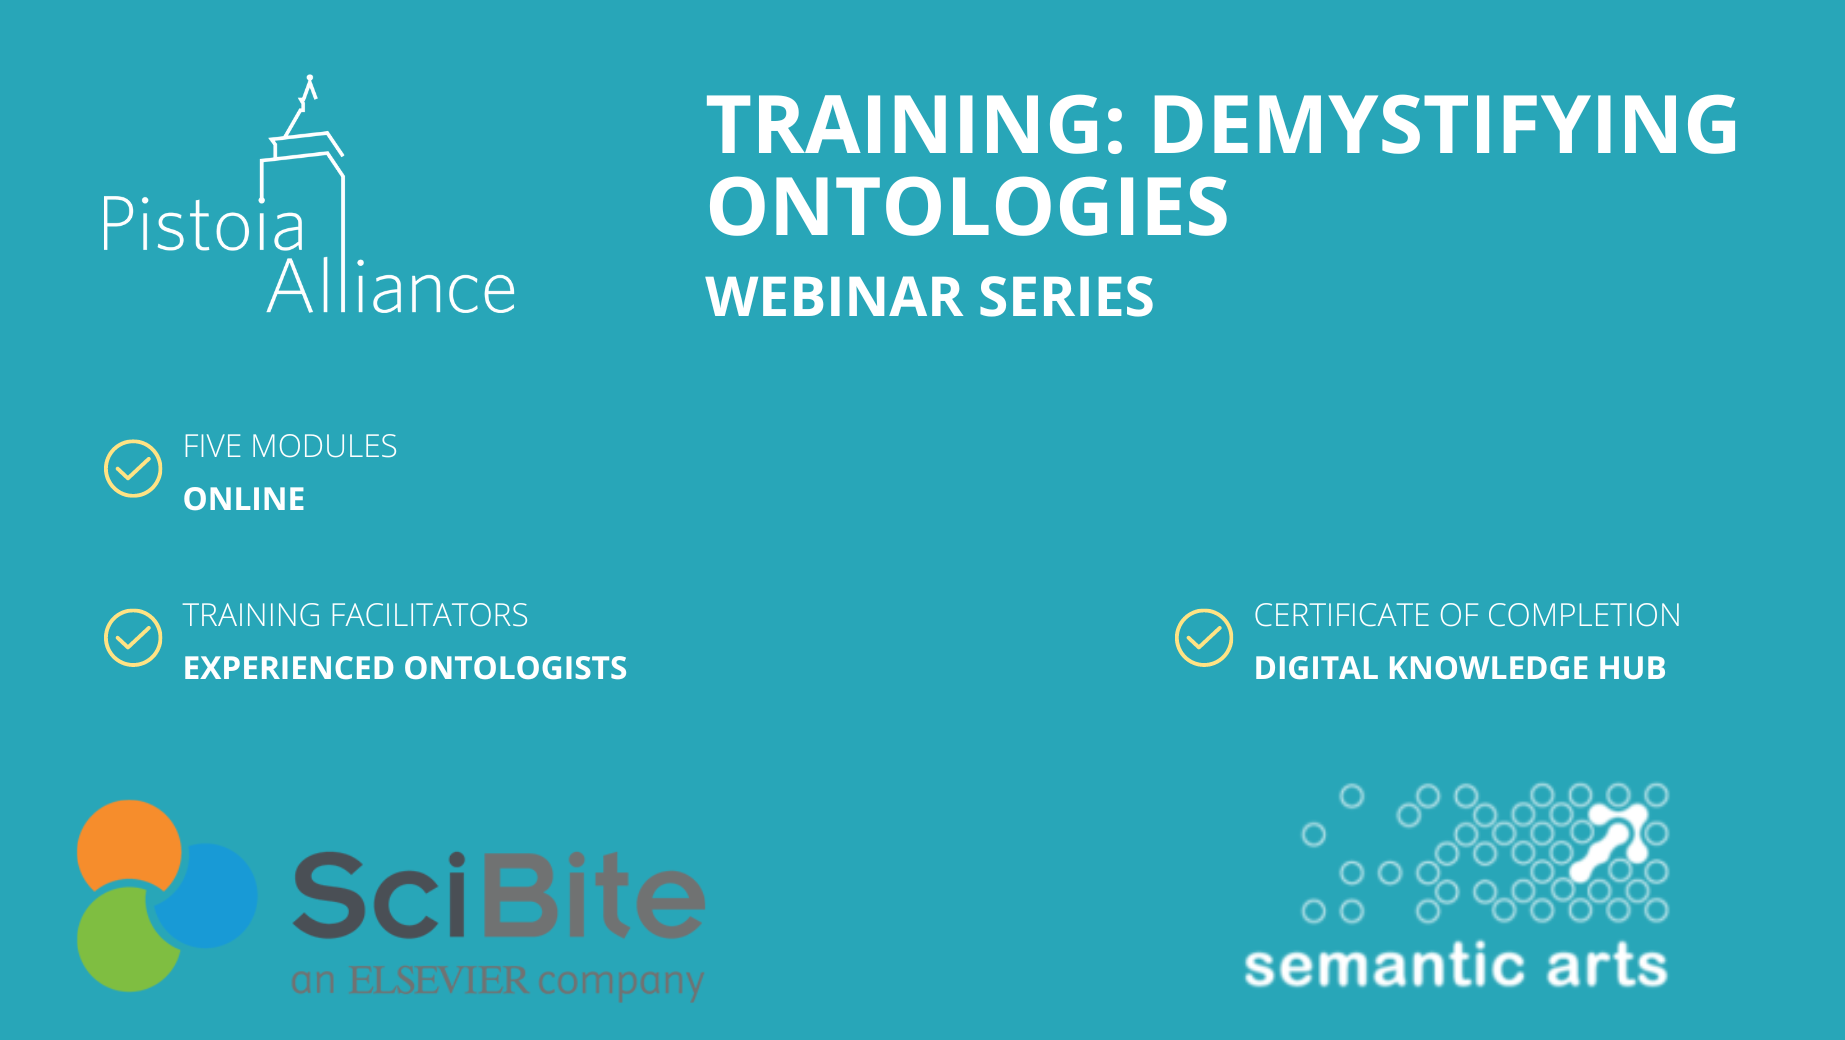 Training: Demystifying Ontologies for Life Science Leaders